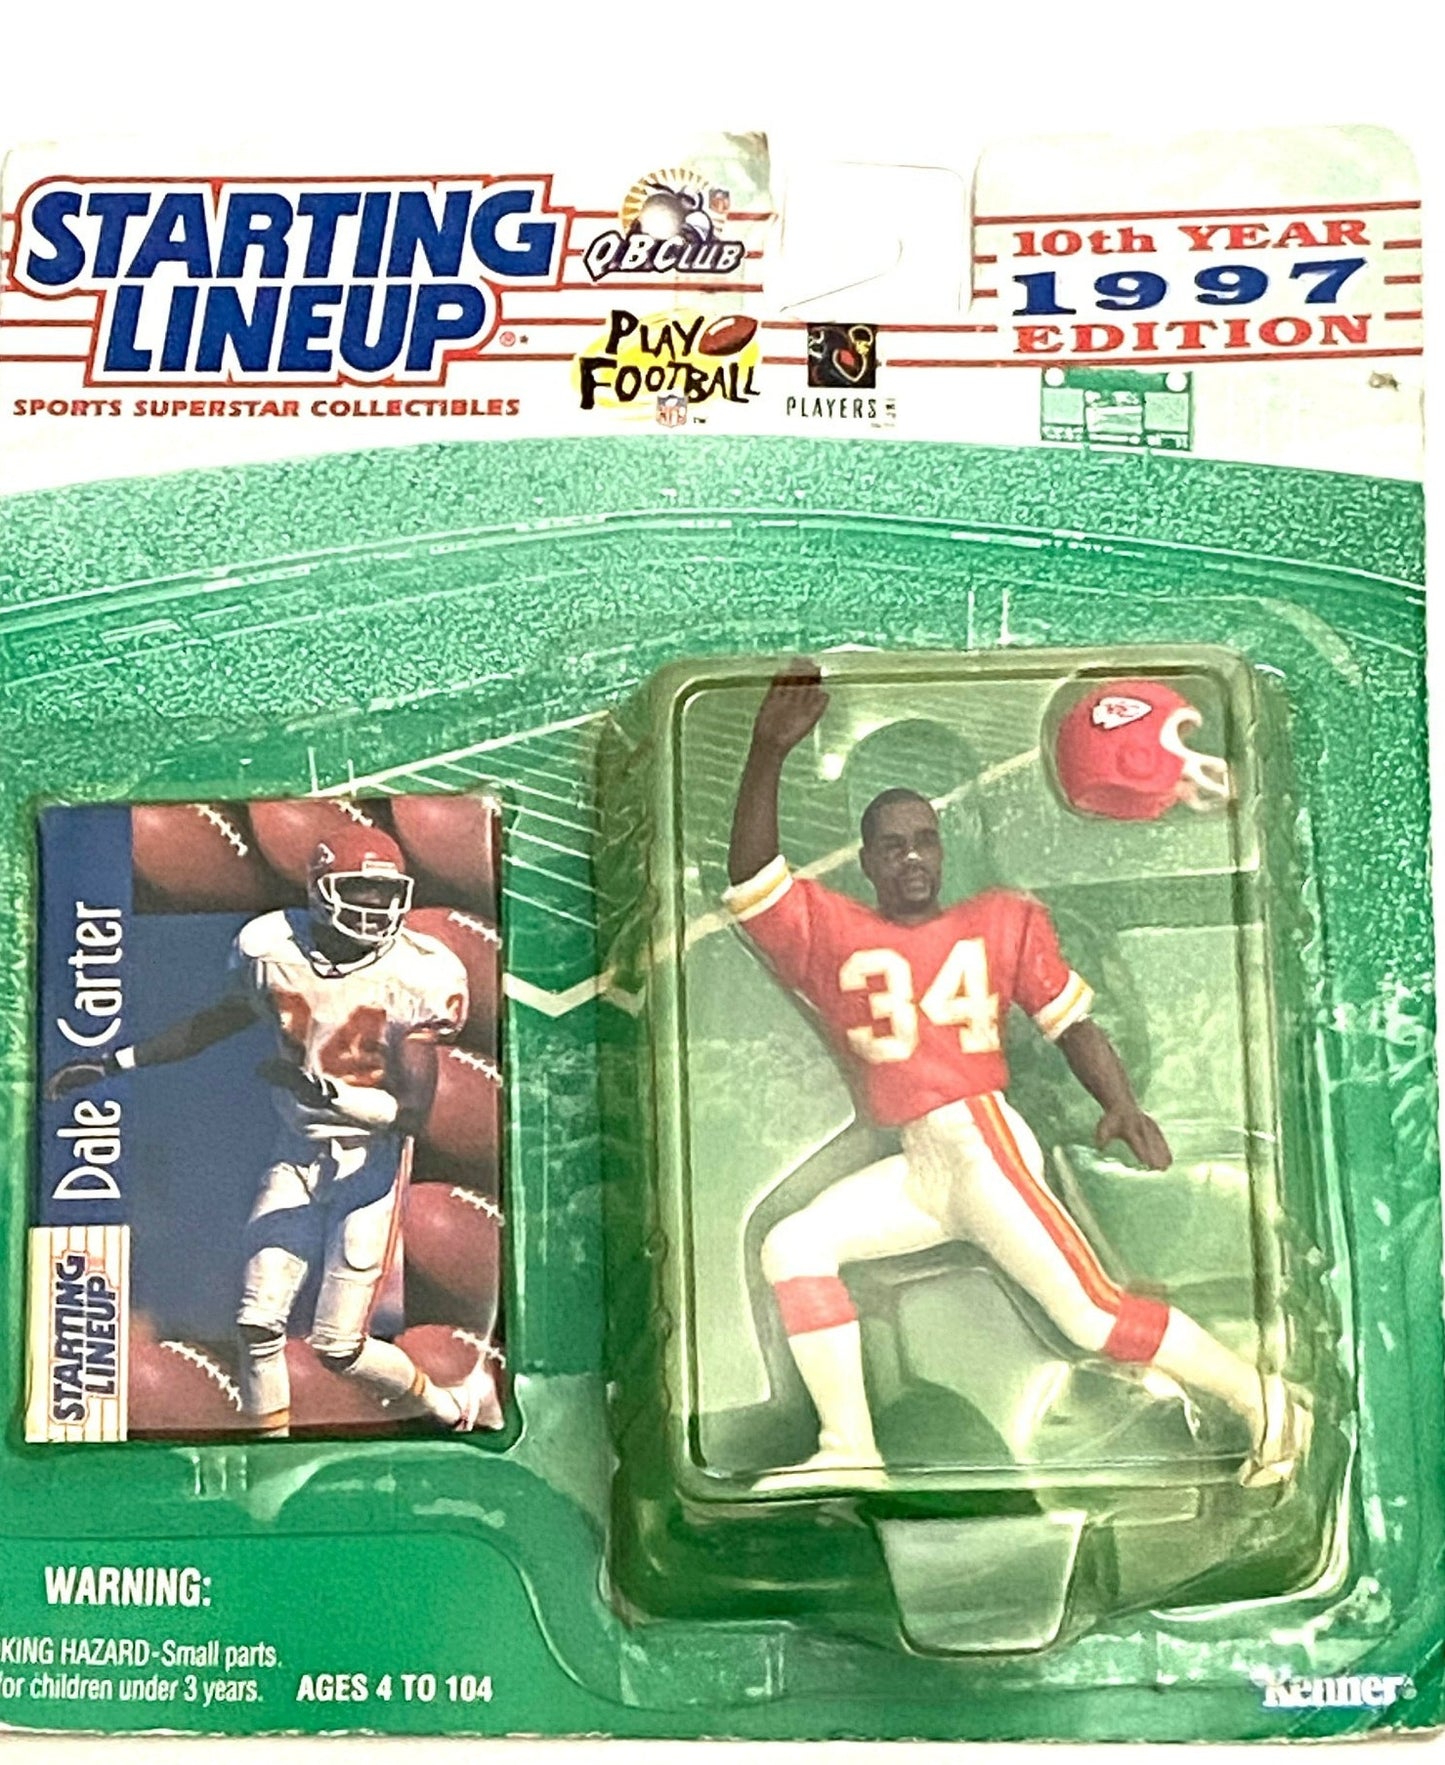 Dale Carter 1997 Kansas City Chiefs NFL Starting Lineup Figurine by Kenner